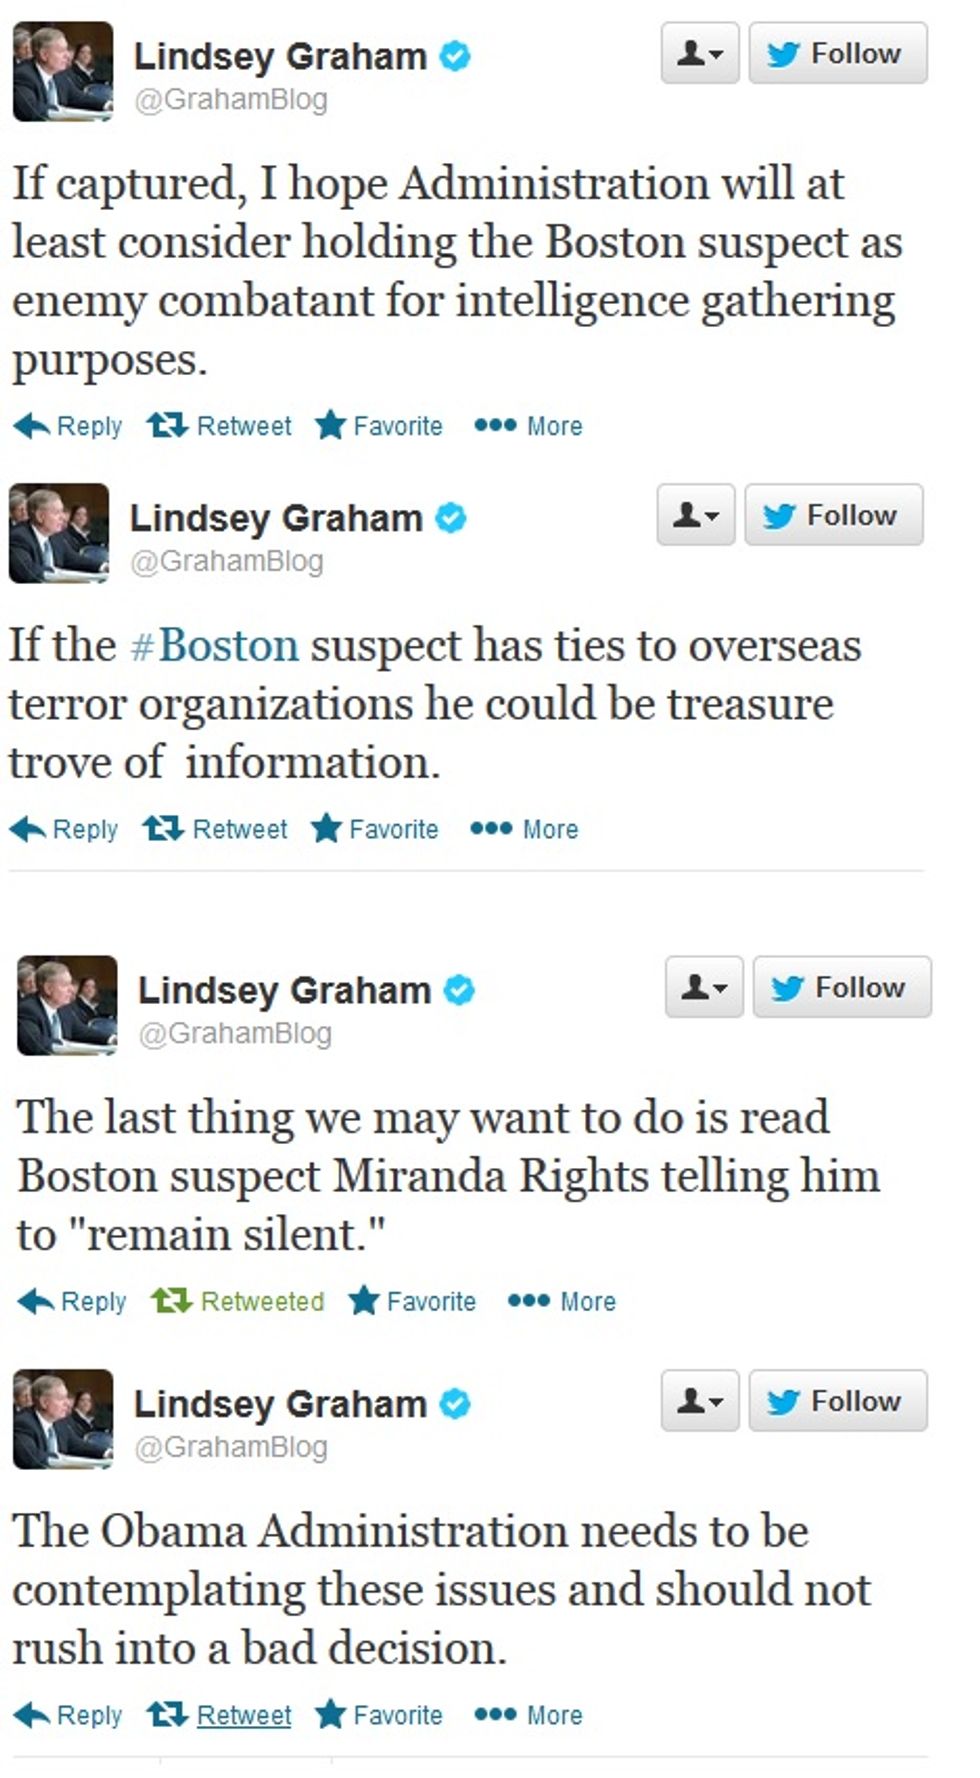 Lindsey Graham Does Not Care For Stupid Constitutional Rights If Bad People Get To Have Them